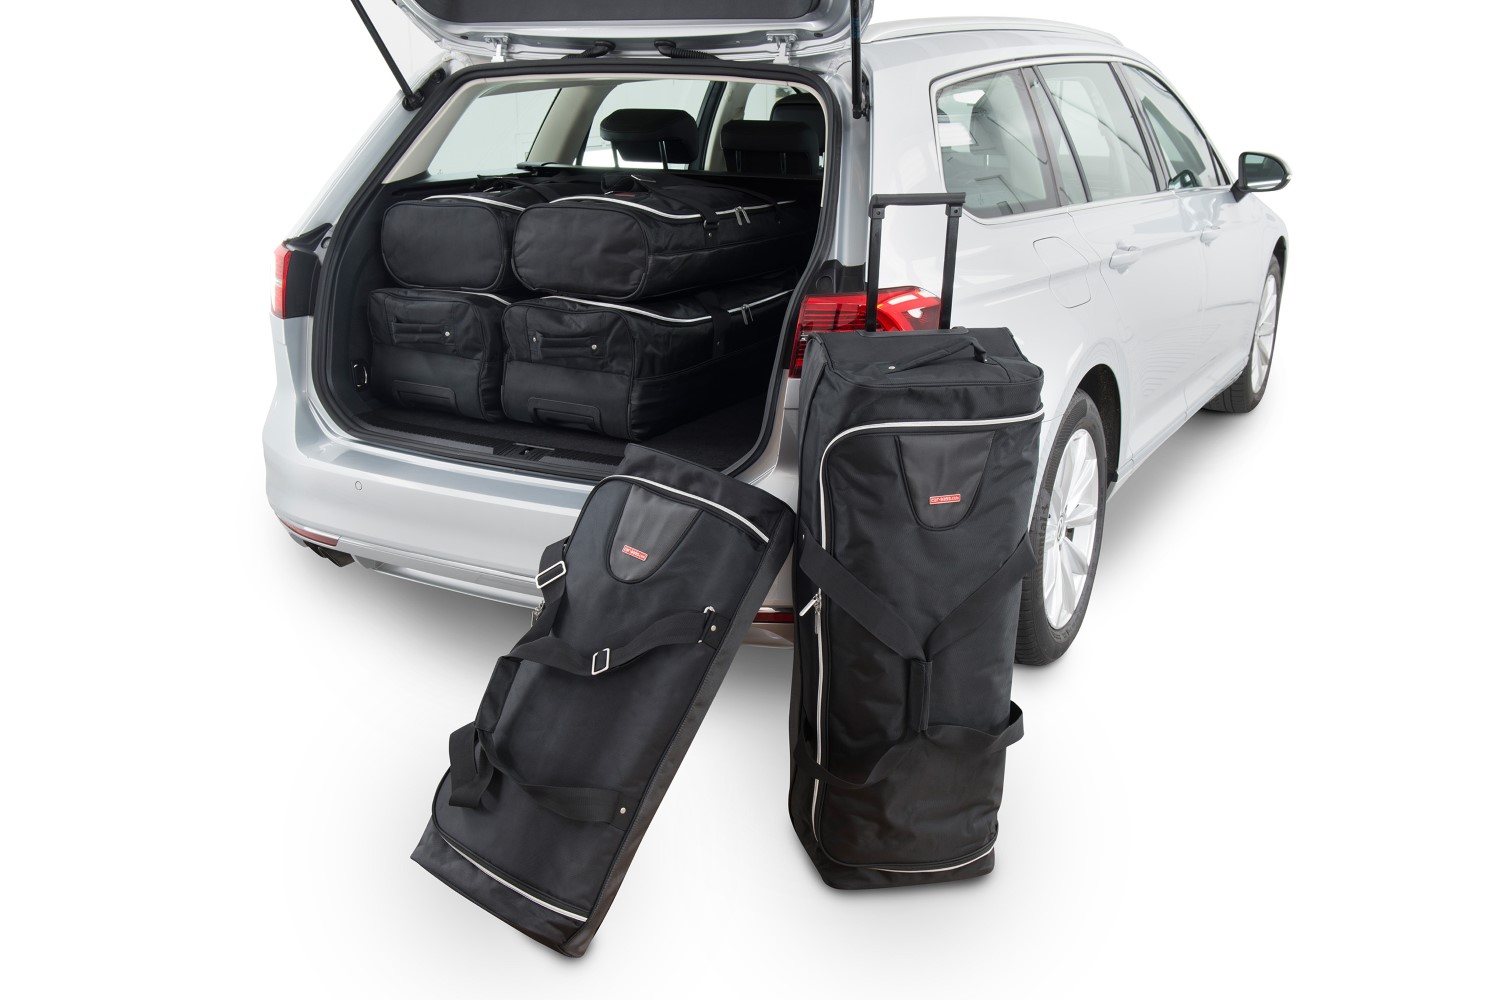 Gallantry Feeling Induce Travel bags tailored for your car - Car-Bags.com